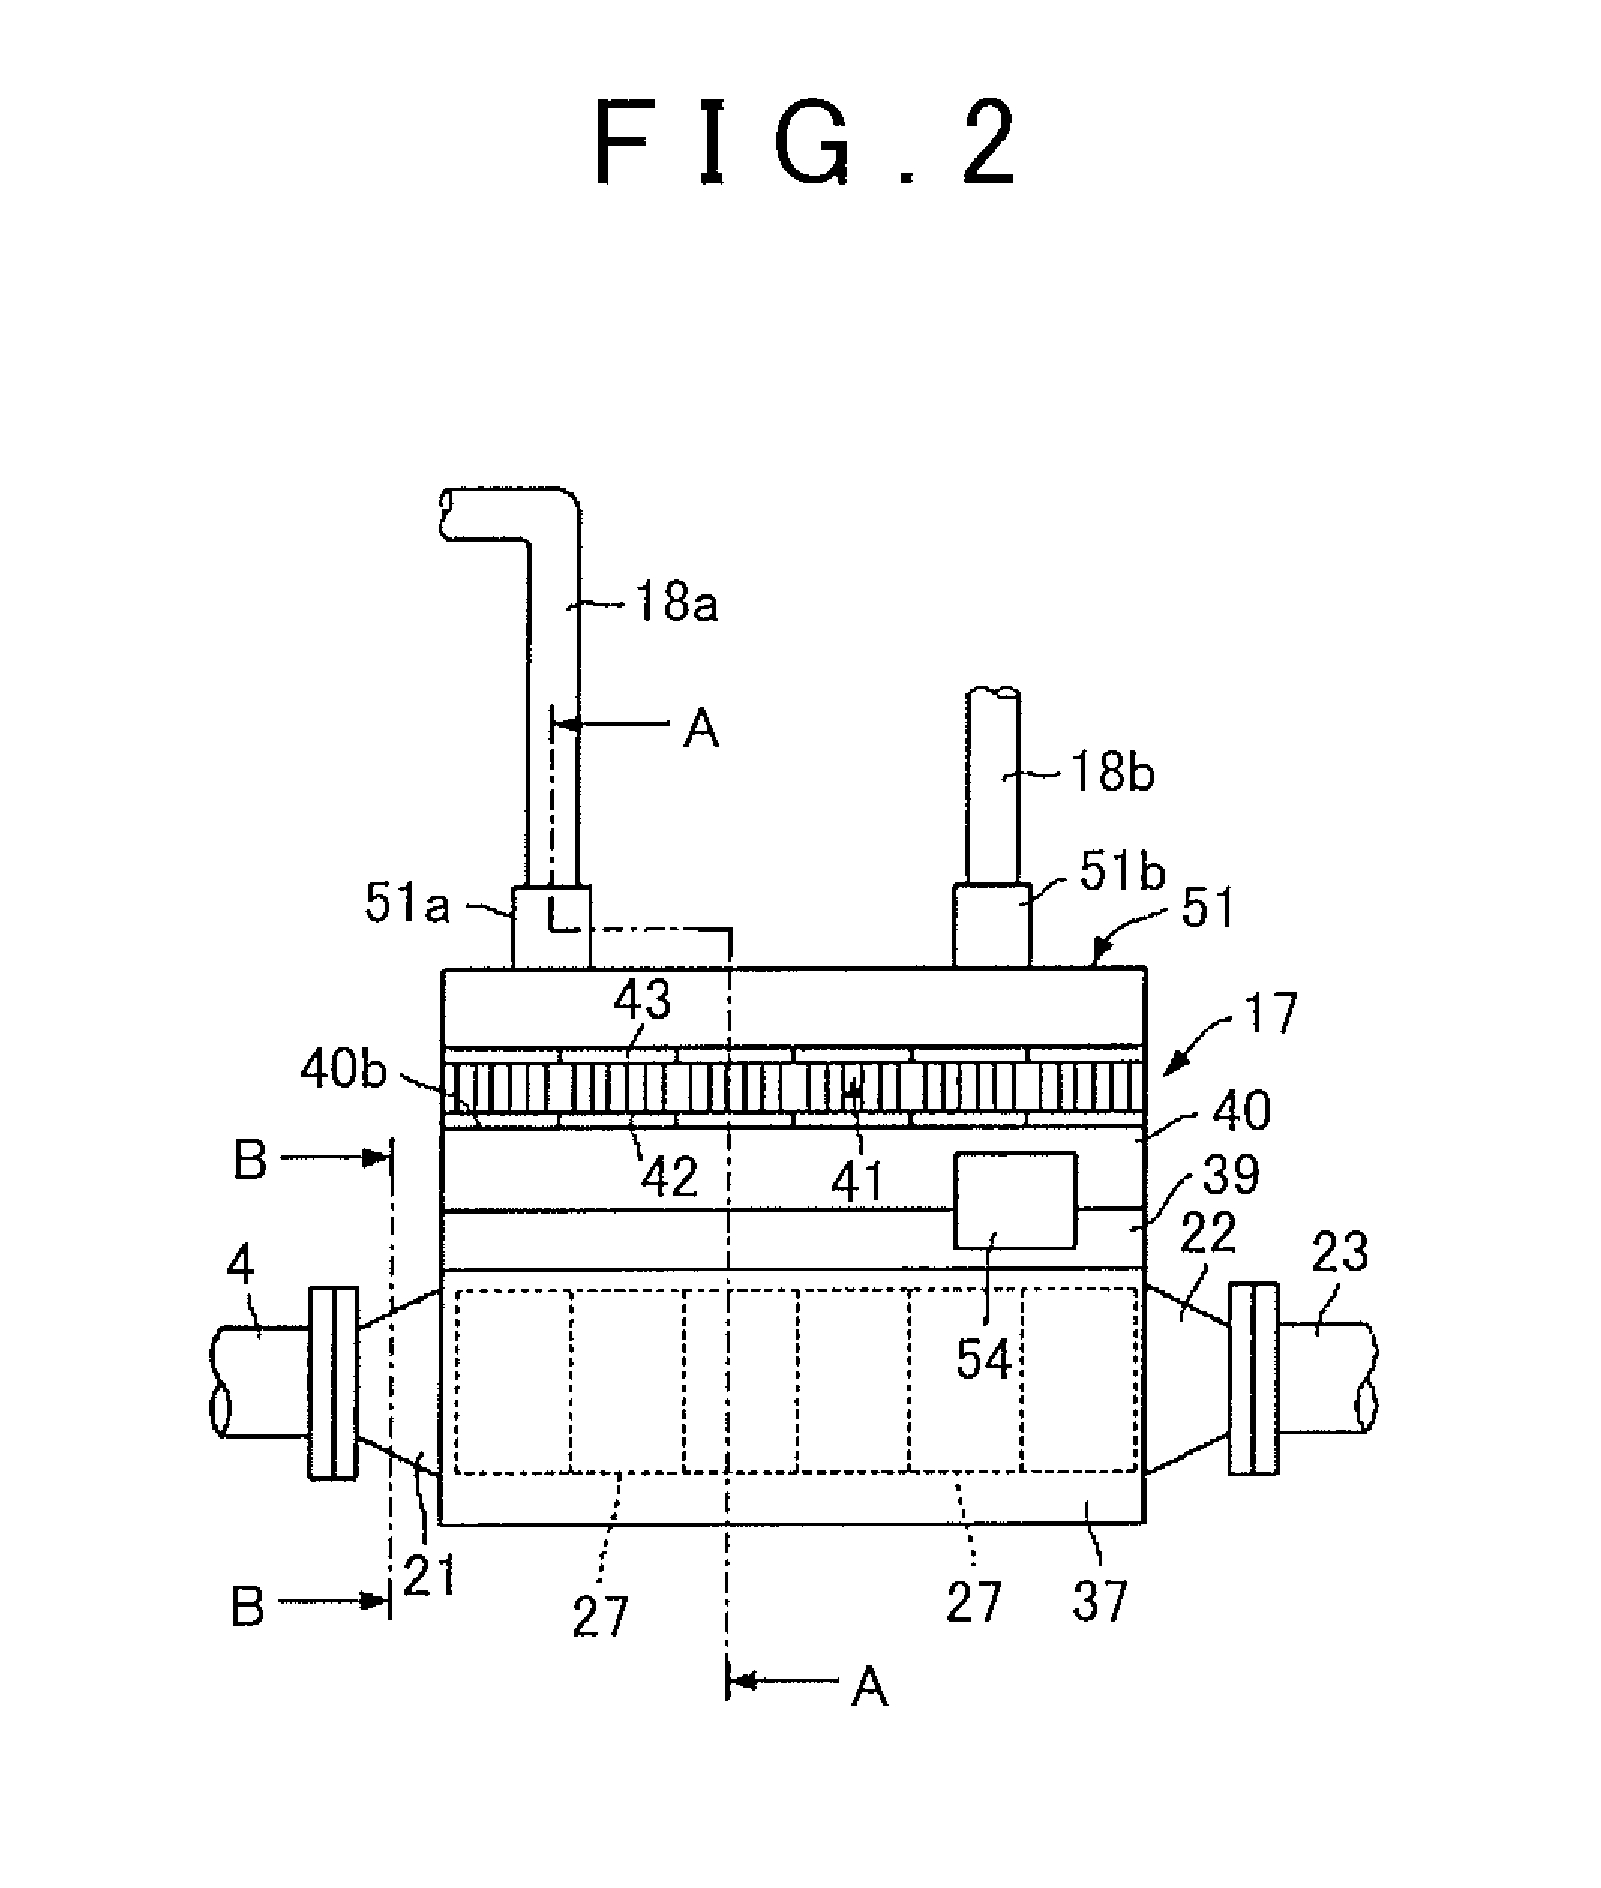 Thermoelectric power generating device